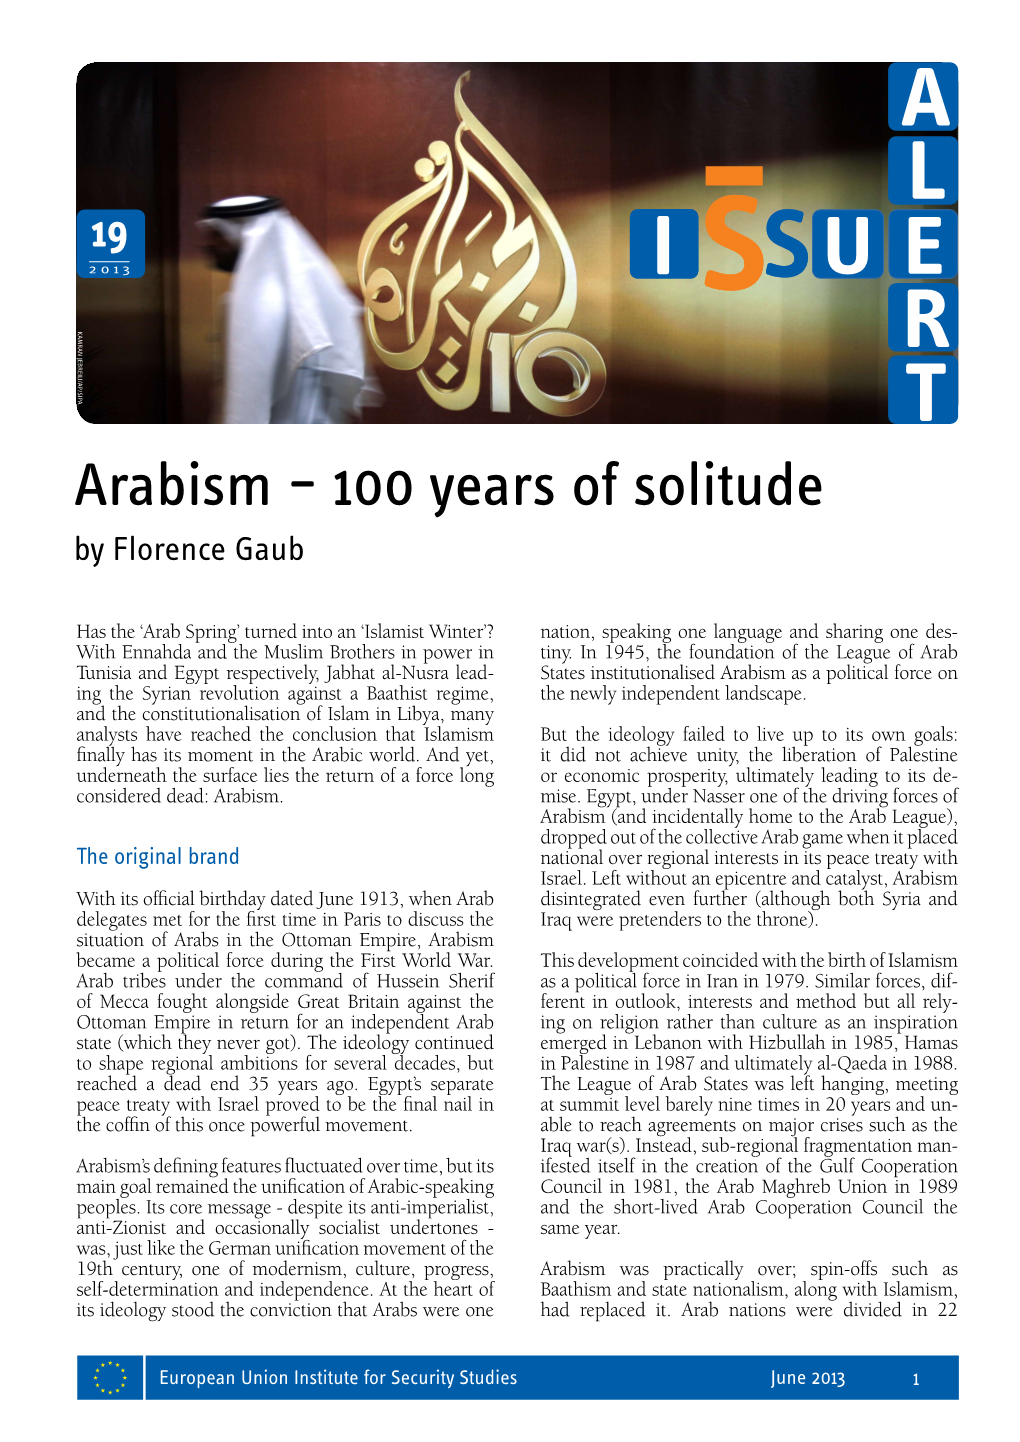 Arabism – 100 Years of Solitude by Florence Gaub